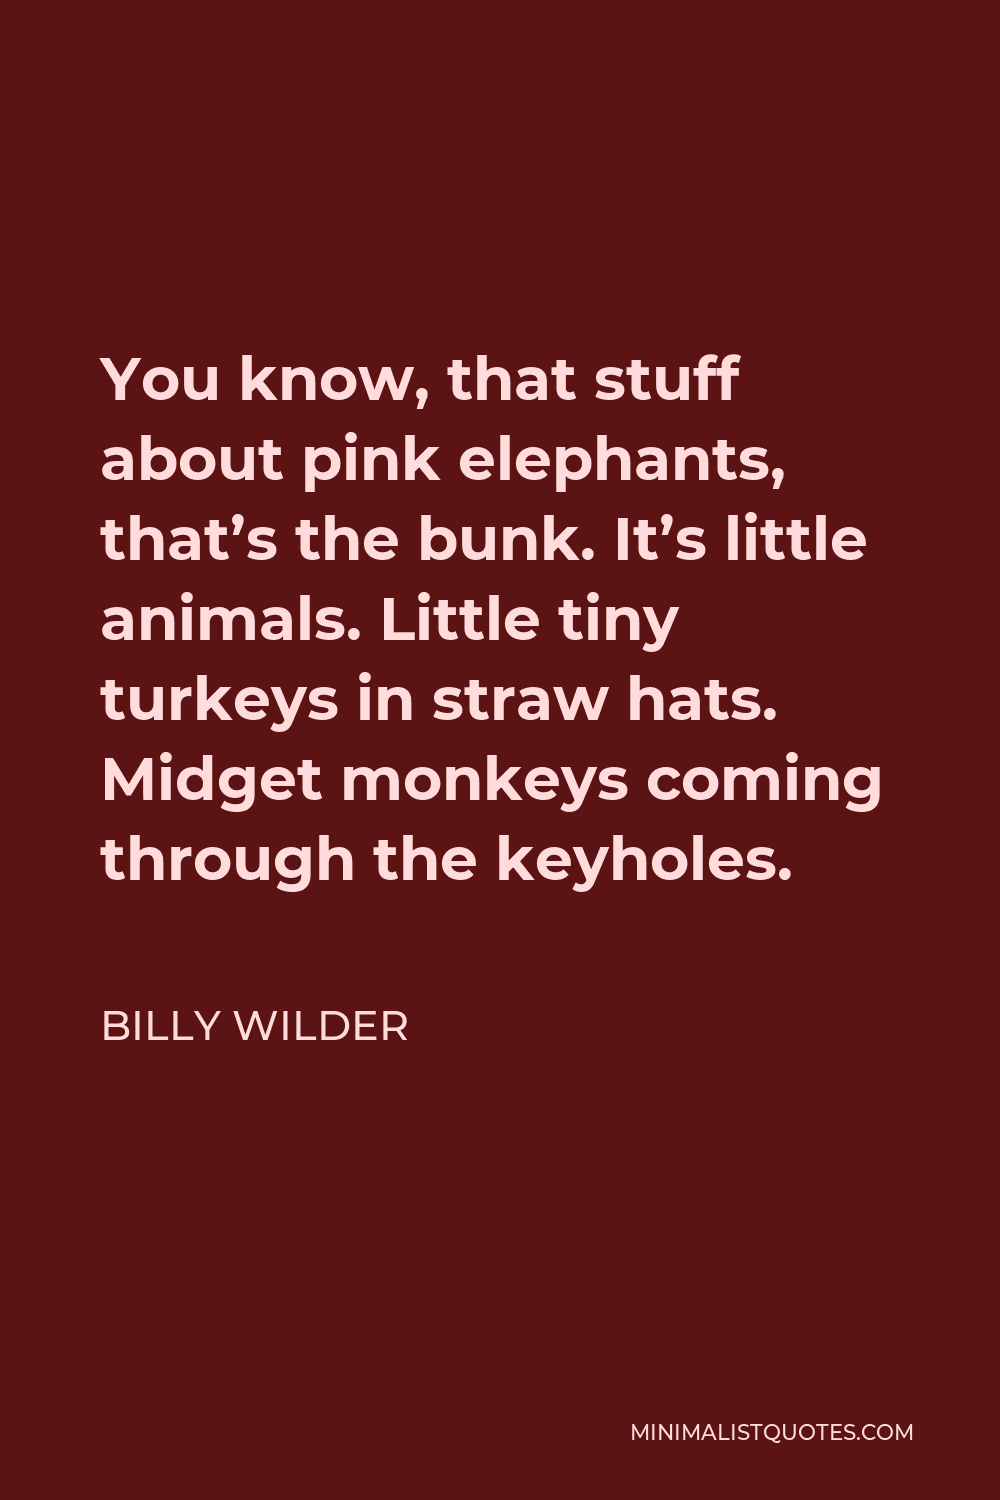 Billy Wilder Quote - You know, that stuff about pink elephants, that’s the bunk. It’s little animals. Little tiny turkeys in straw hats. Midget monkeys coming through the keyholes.